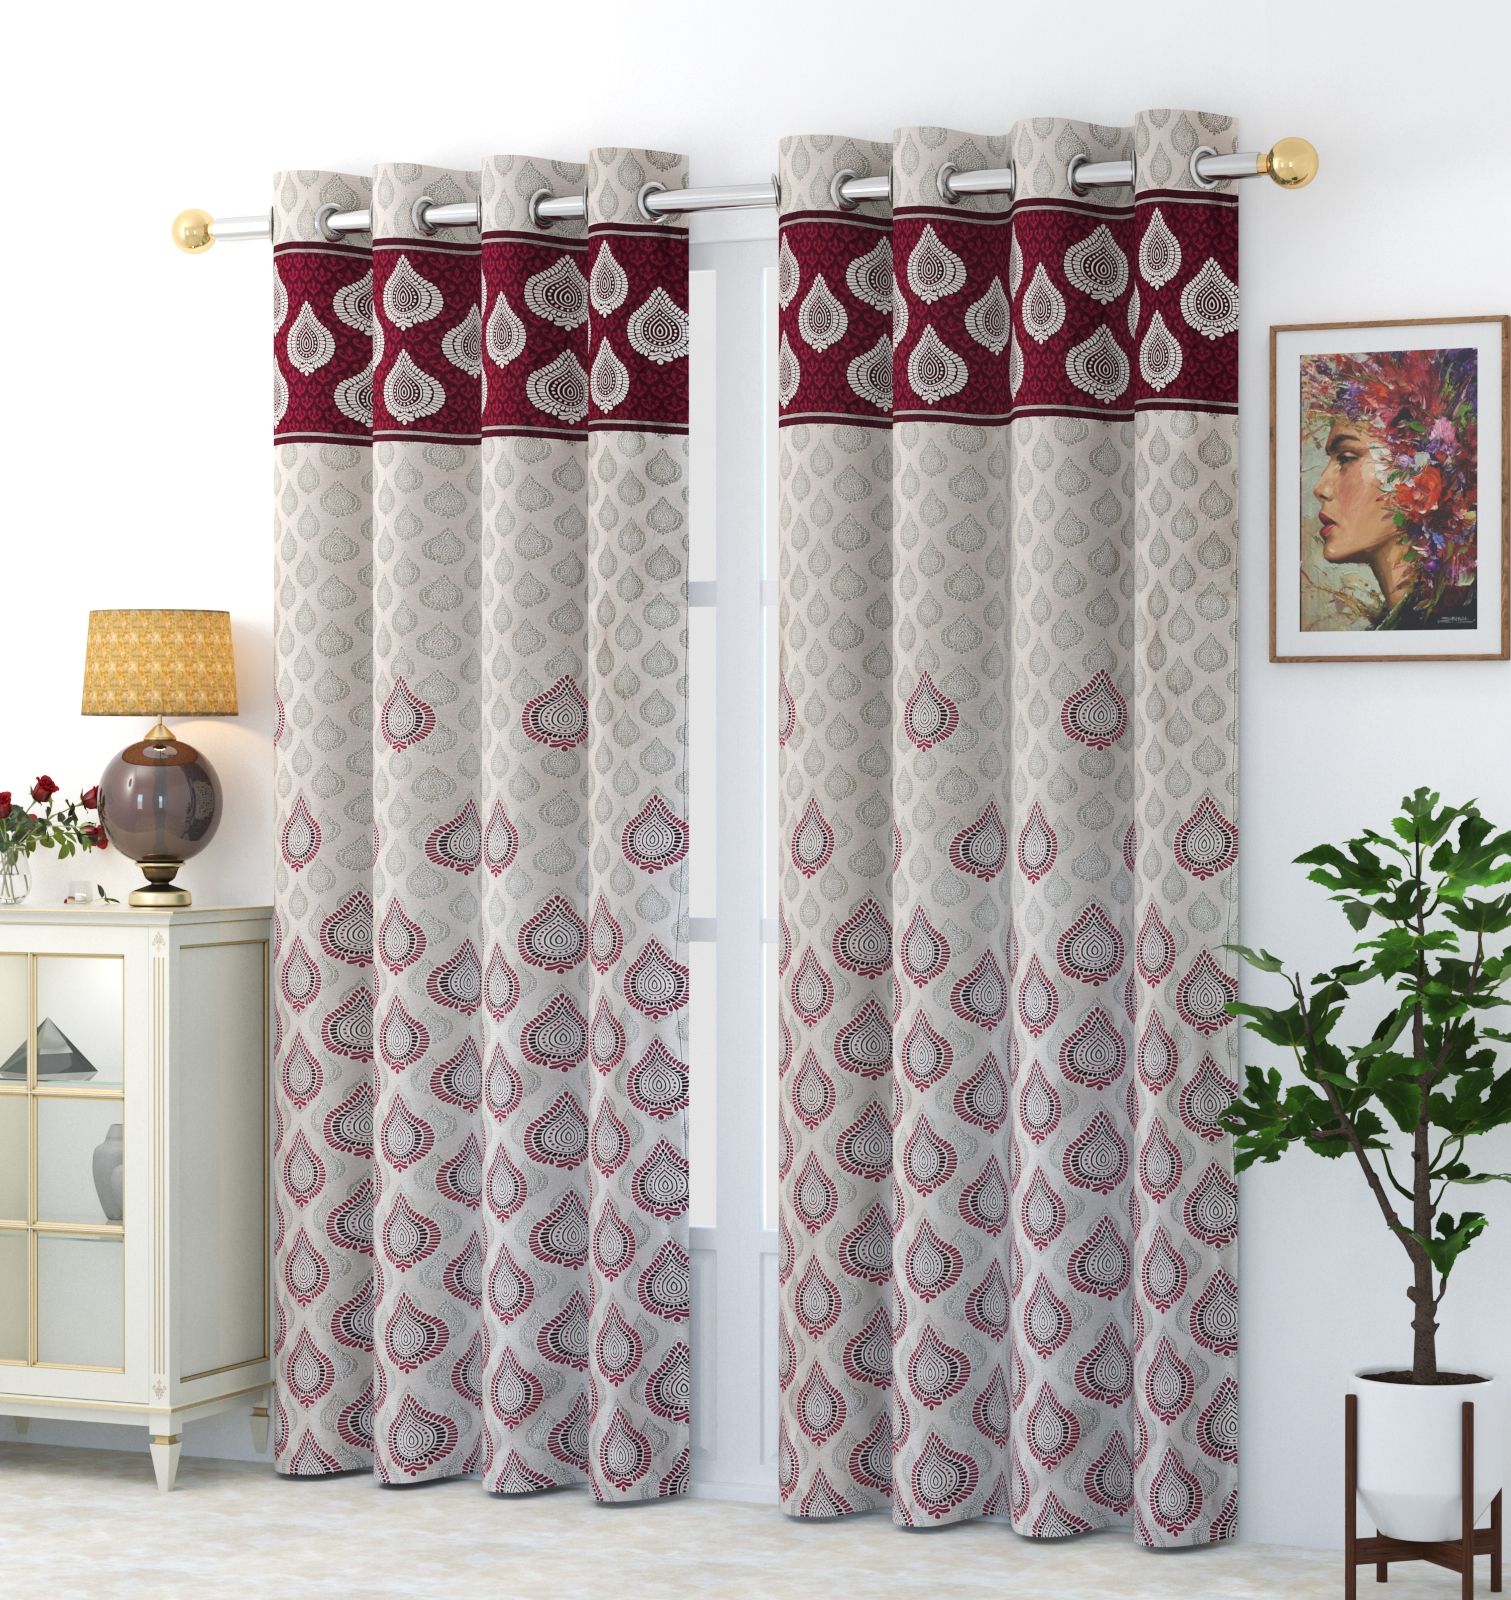     			FURNISHING HUT Abstract Room Darkening Eyelet Curtain 7 ft ( Pack of 2 ) - Pink